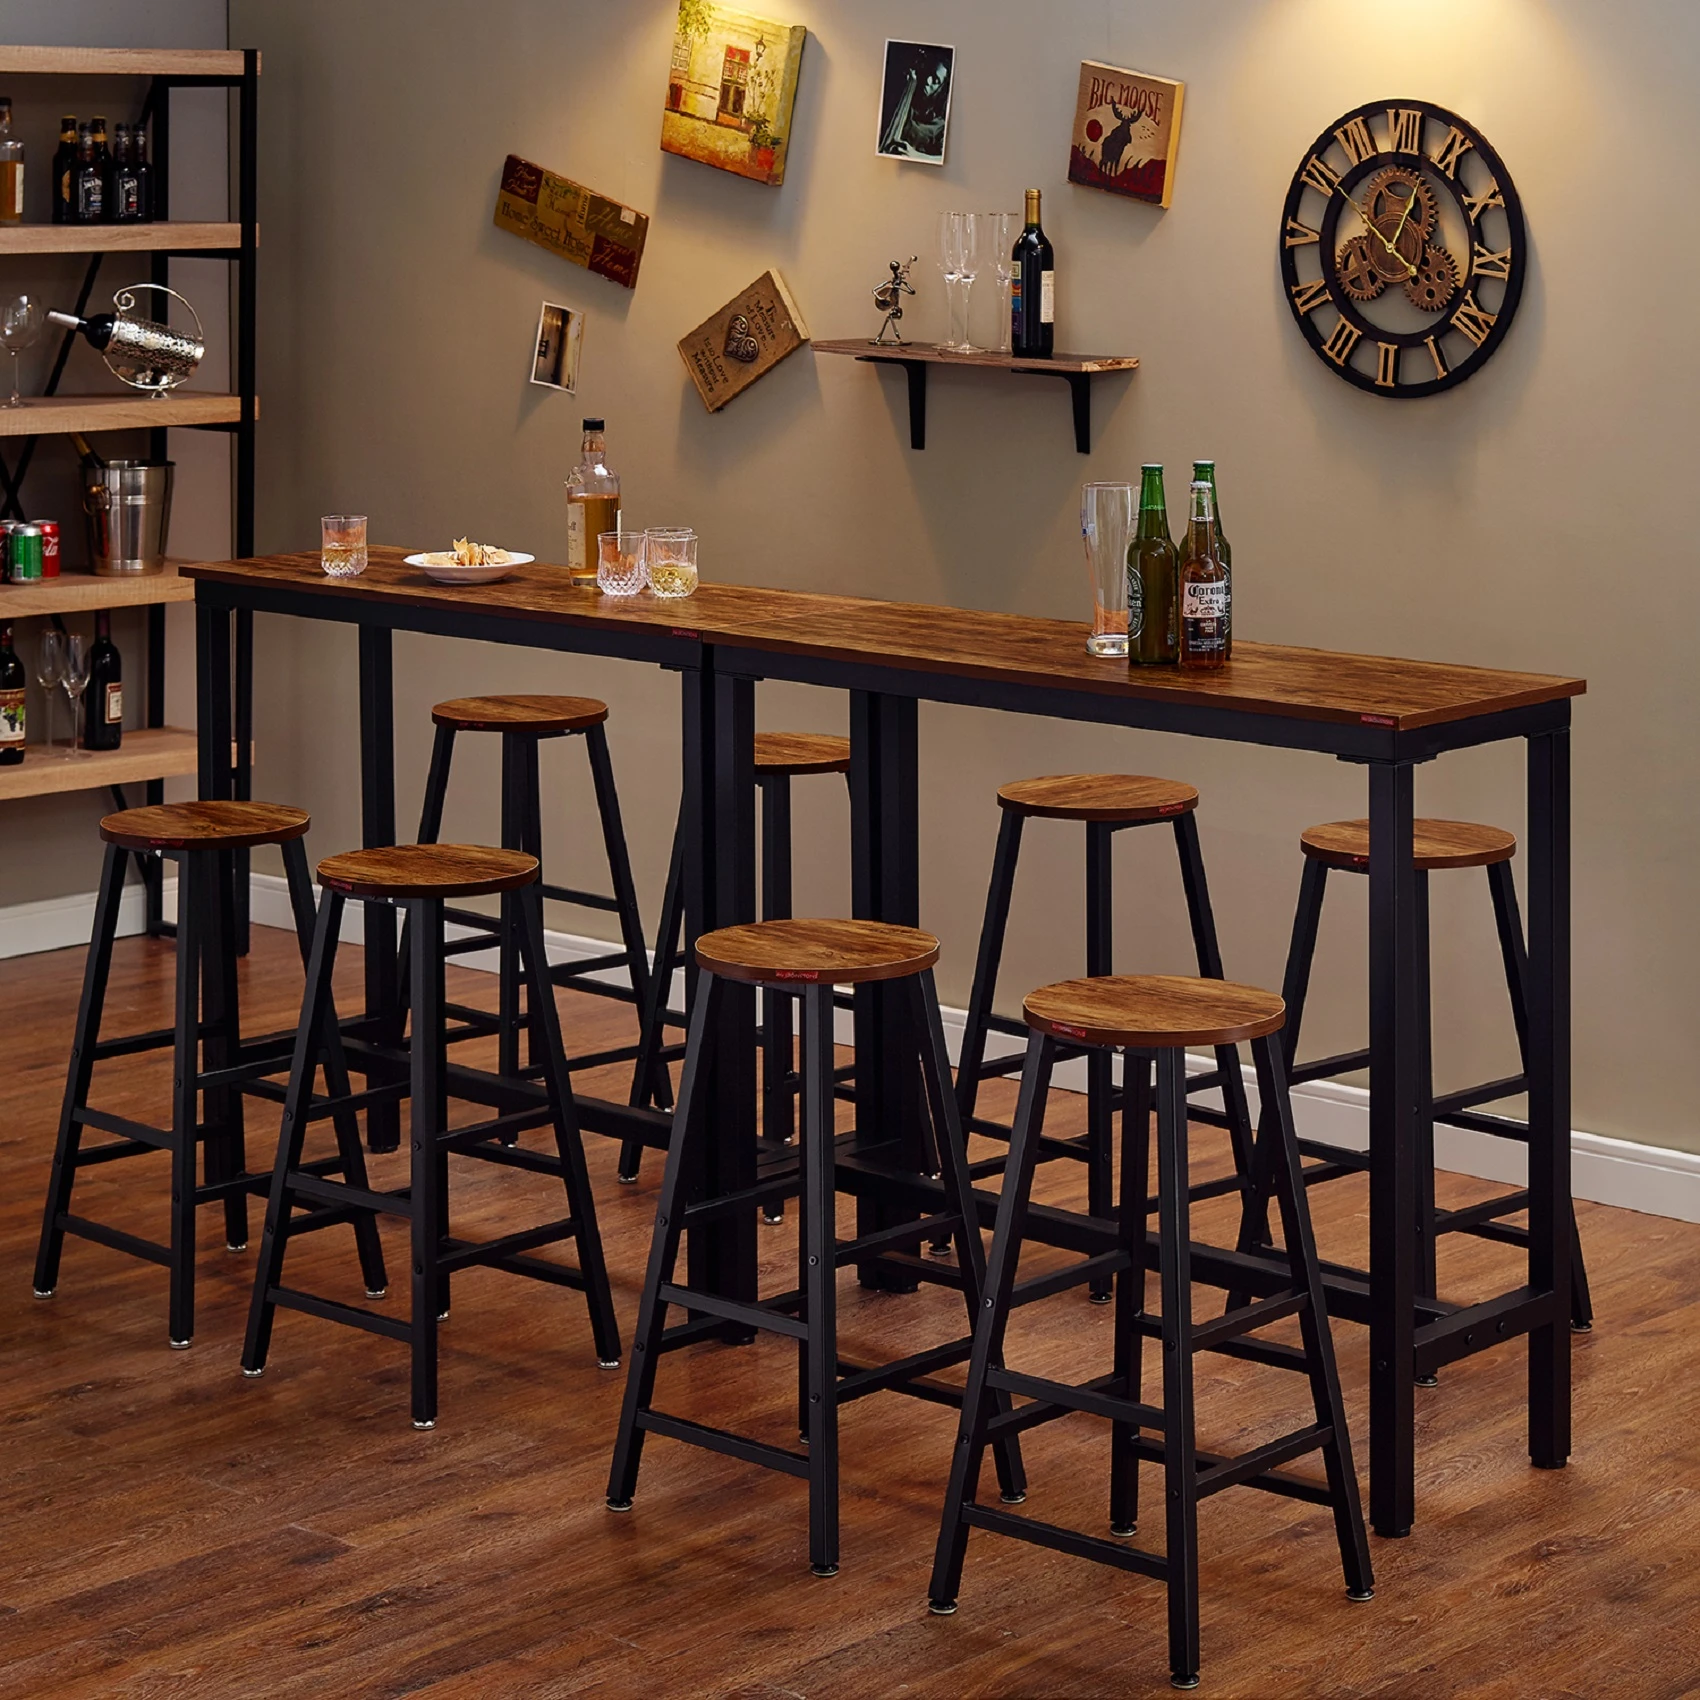 2020 High Quality Scooter Iron Wood Wine Counter Bar Cabinet Table